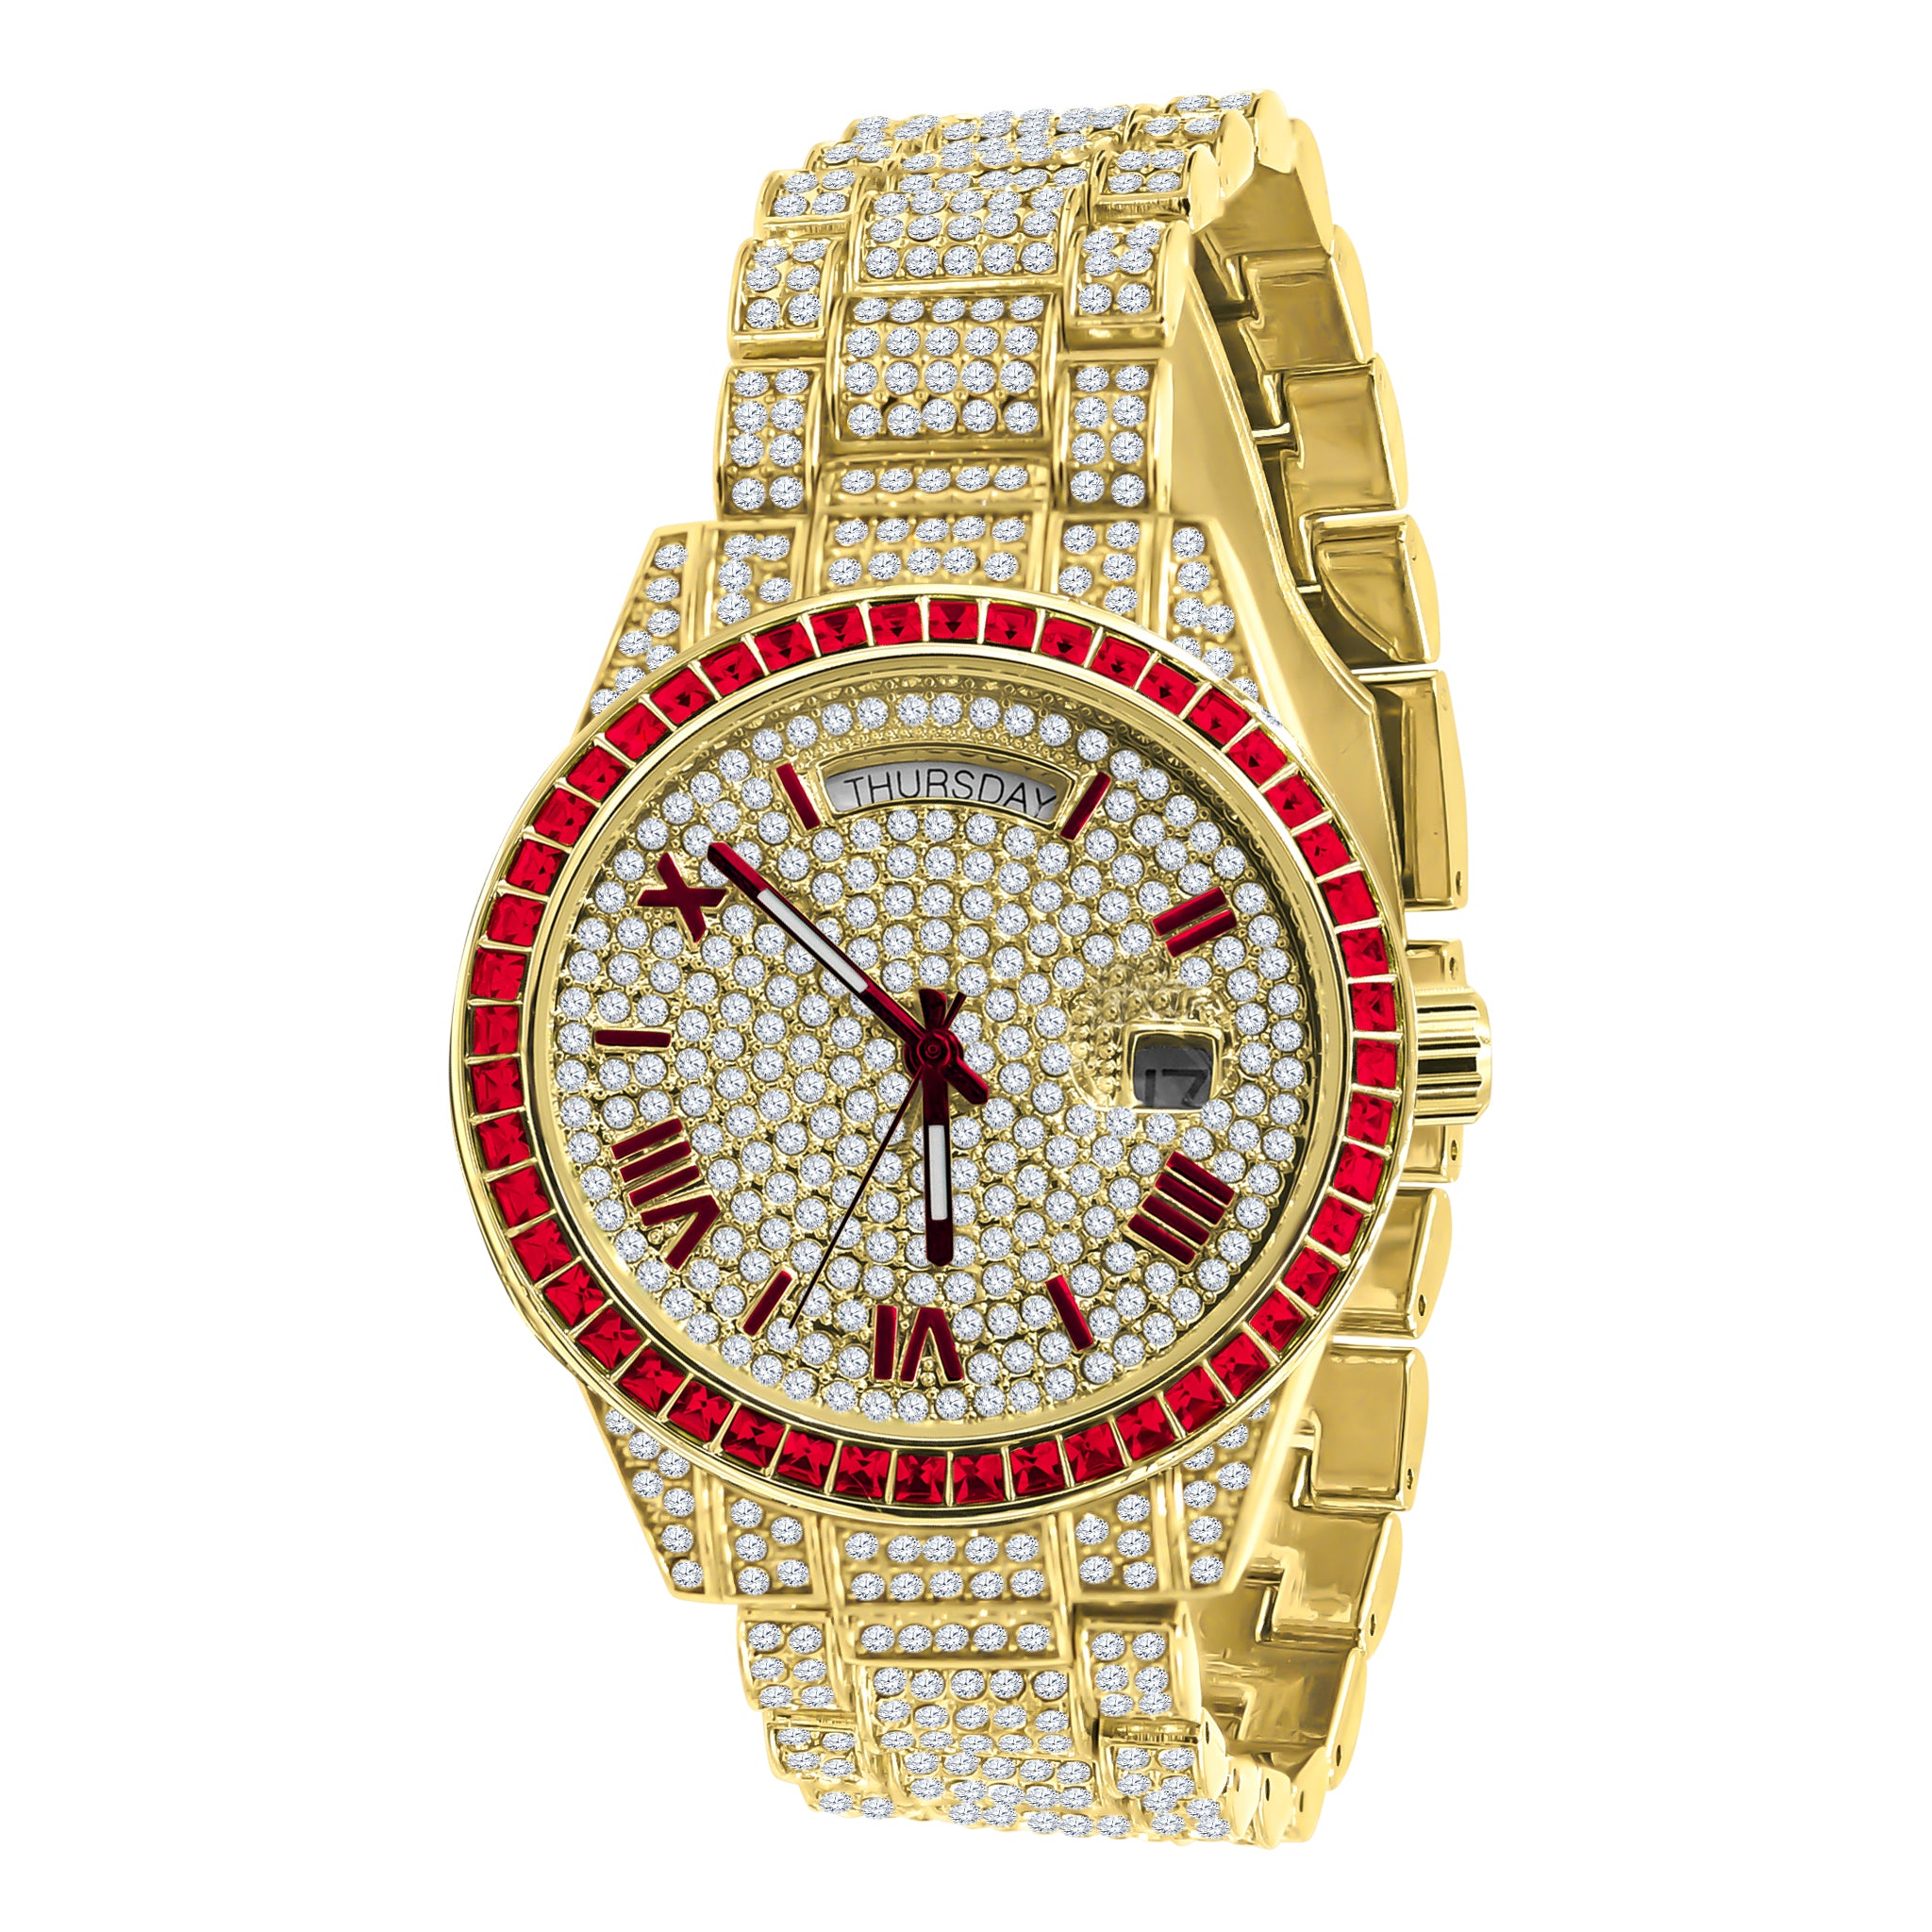 CRANT BLING WATCH CRYSTAL I 563136